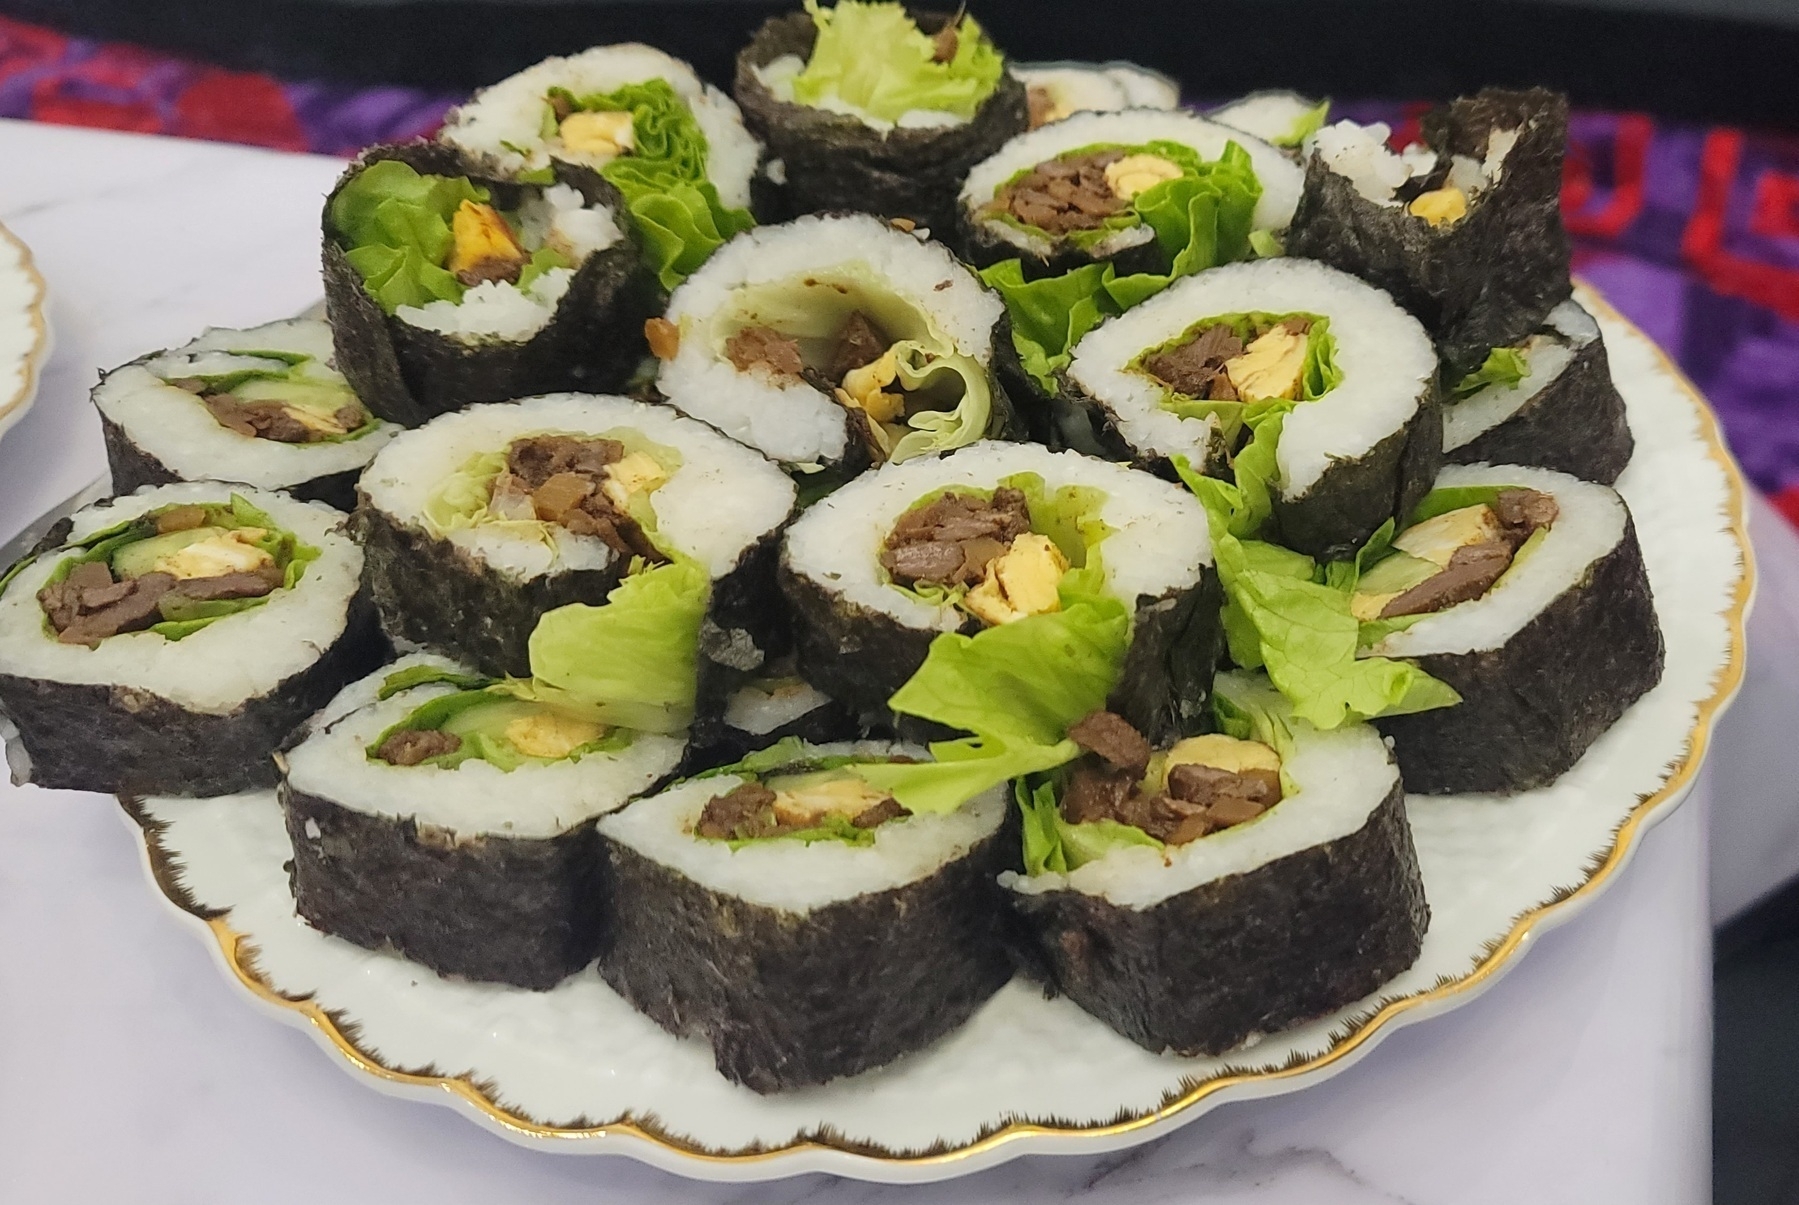 plate of sushi rolls filled with meat, egg and lettuce